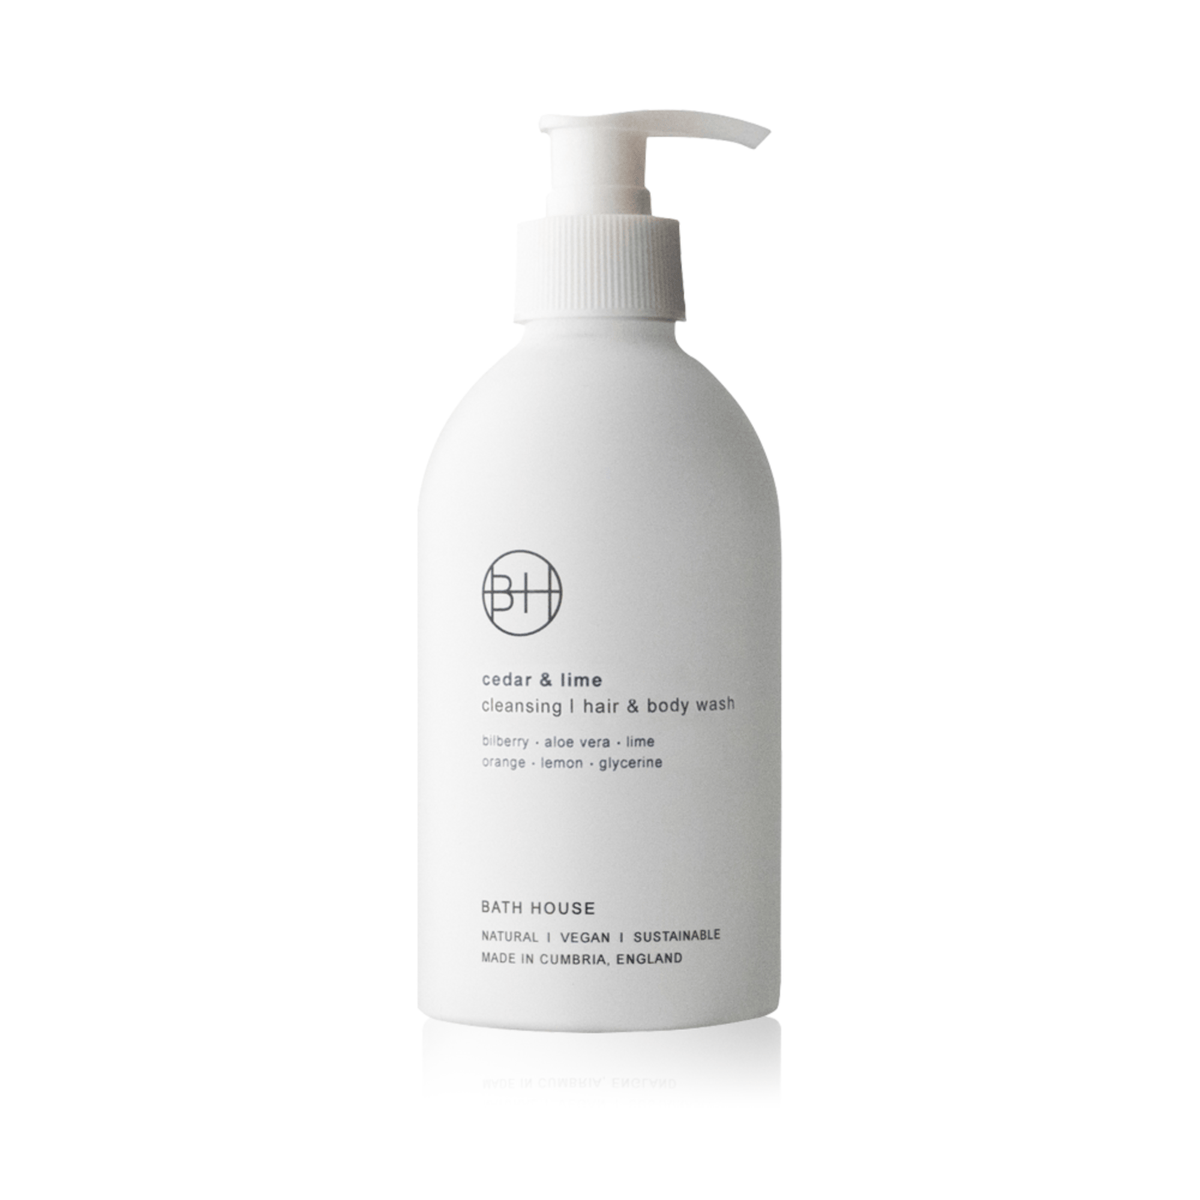 Primary Image of Cedar & Lime - Hair and Body Wash